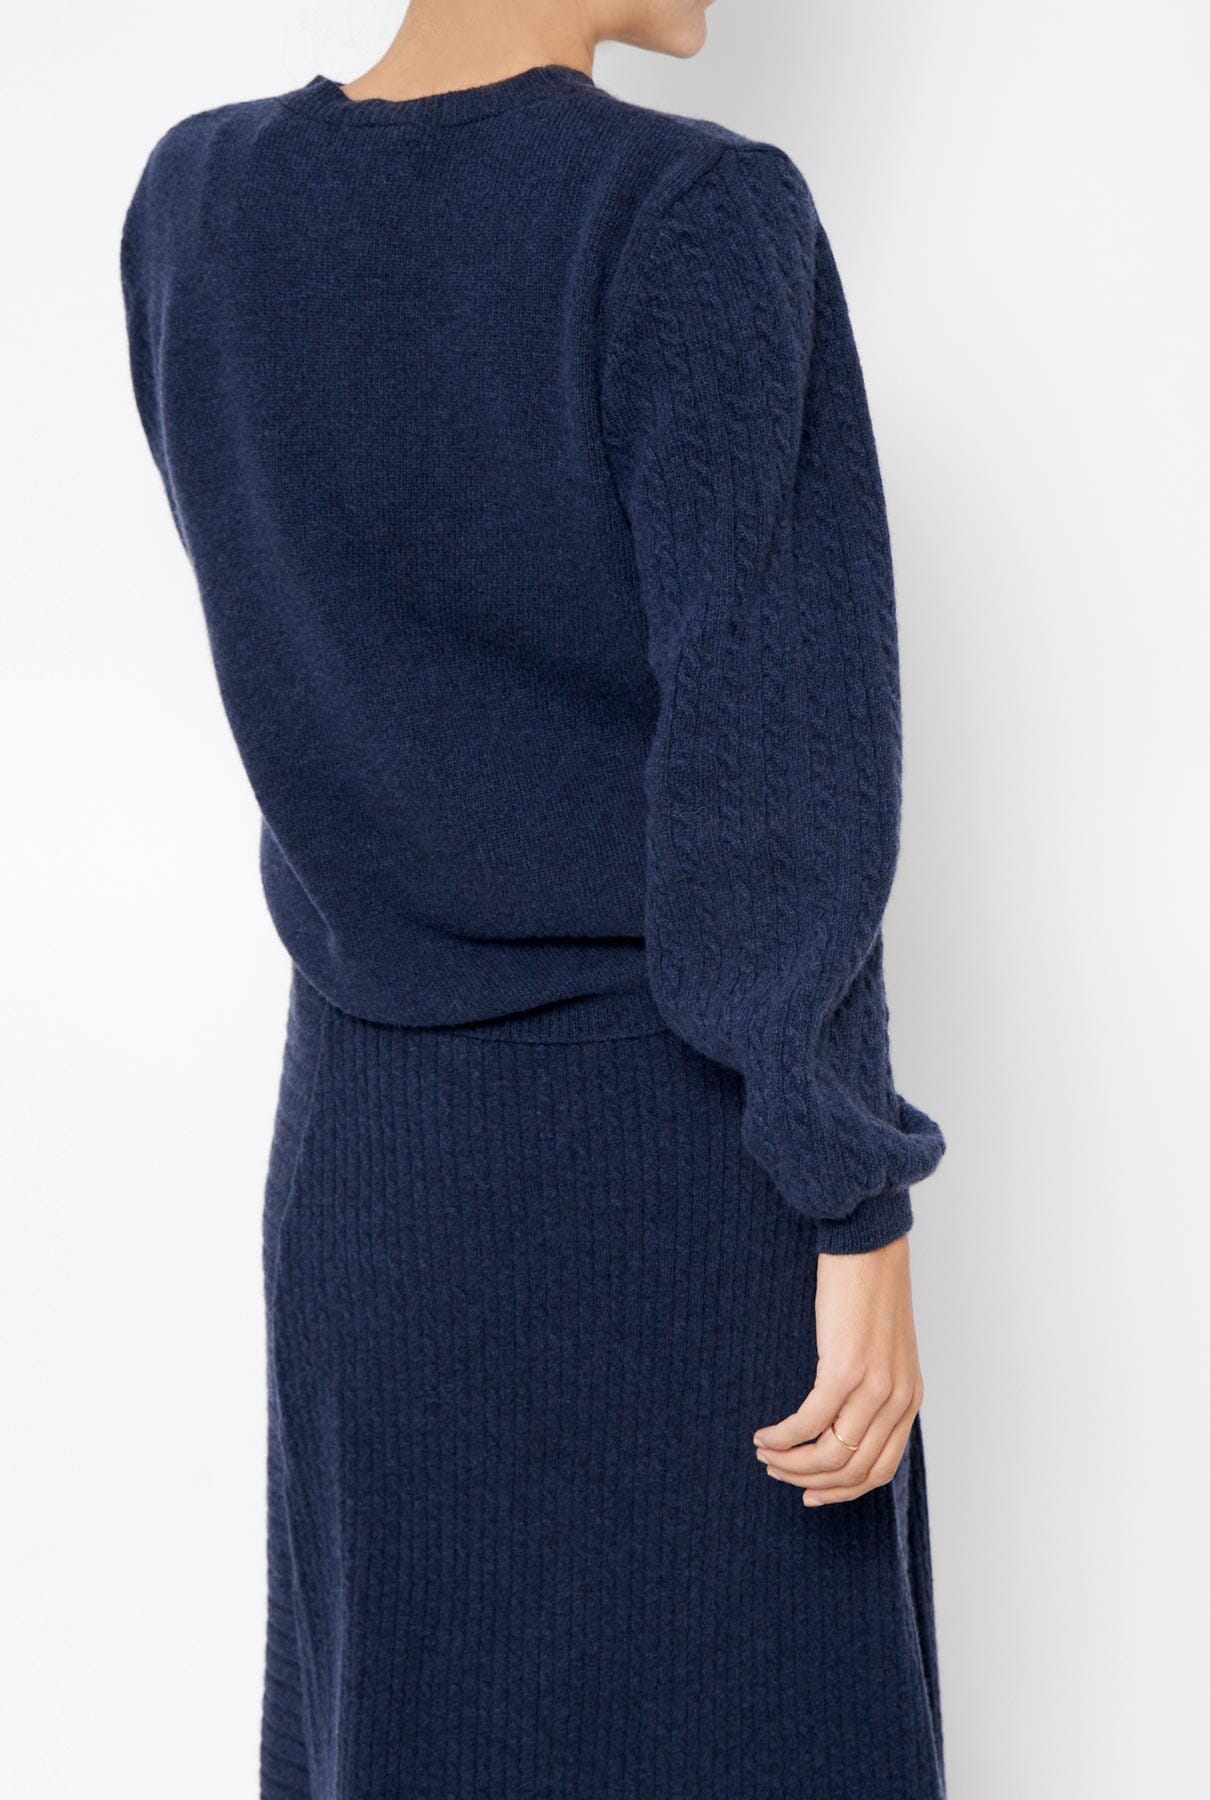 CECILIE CARDIGAN NAVY Sweaters Culto 1105 